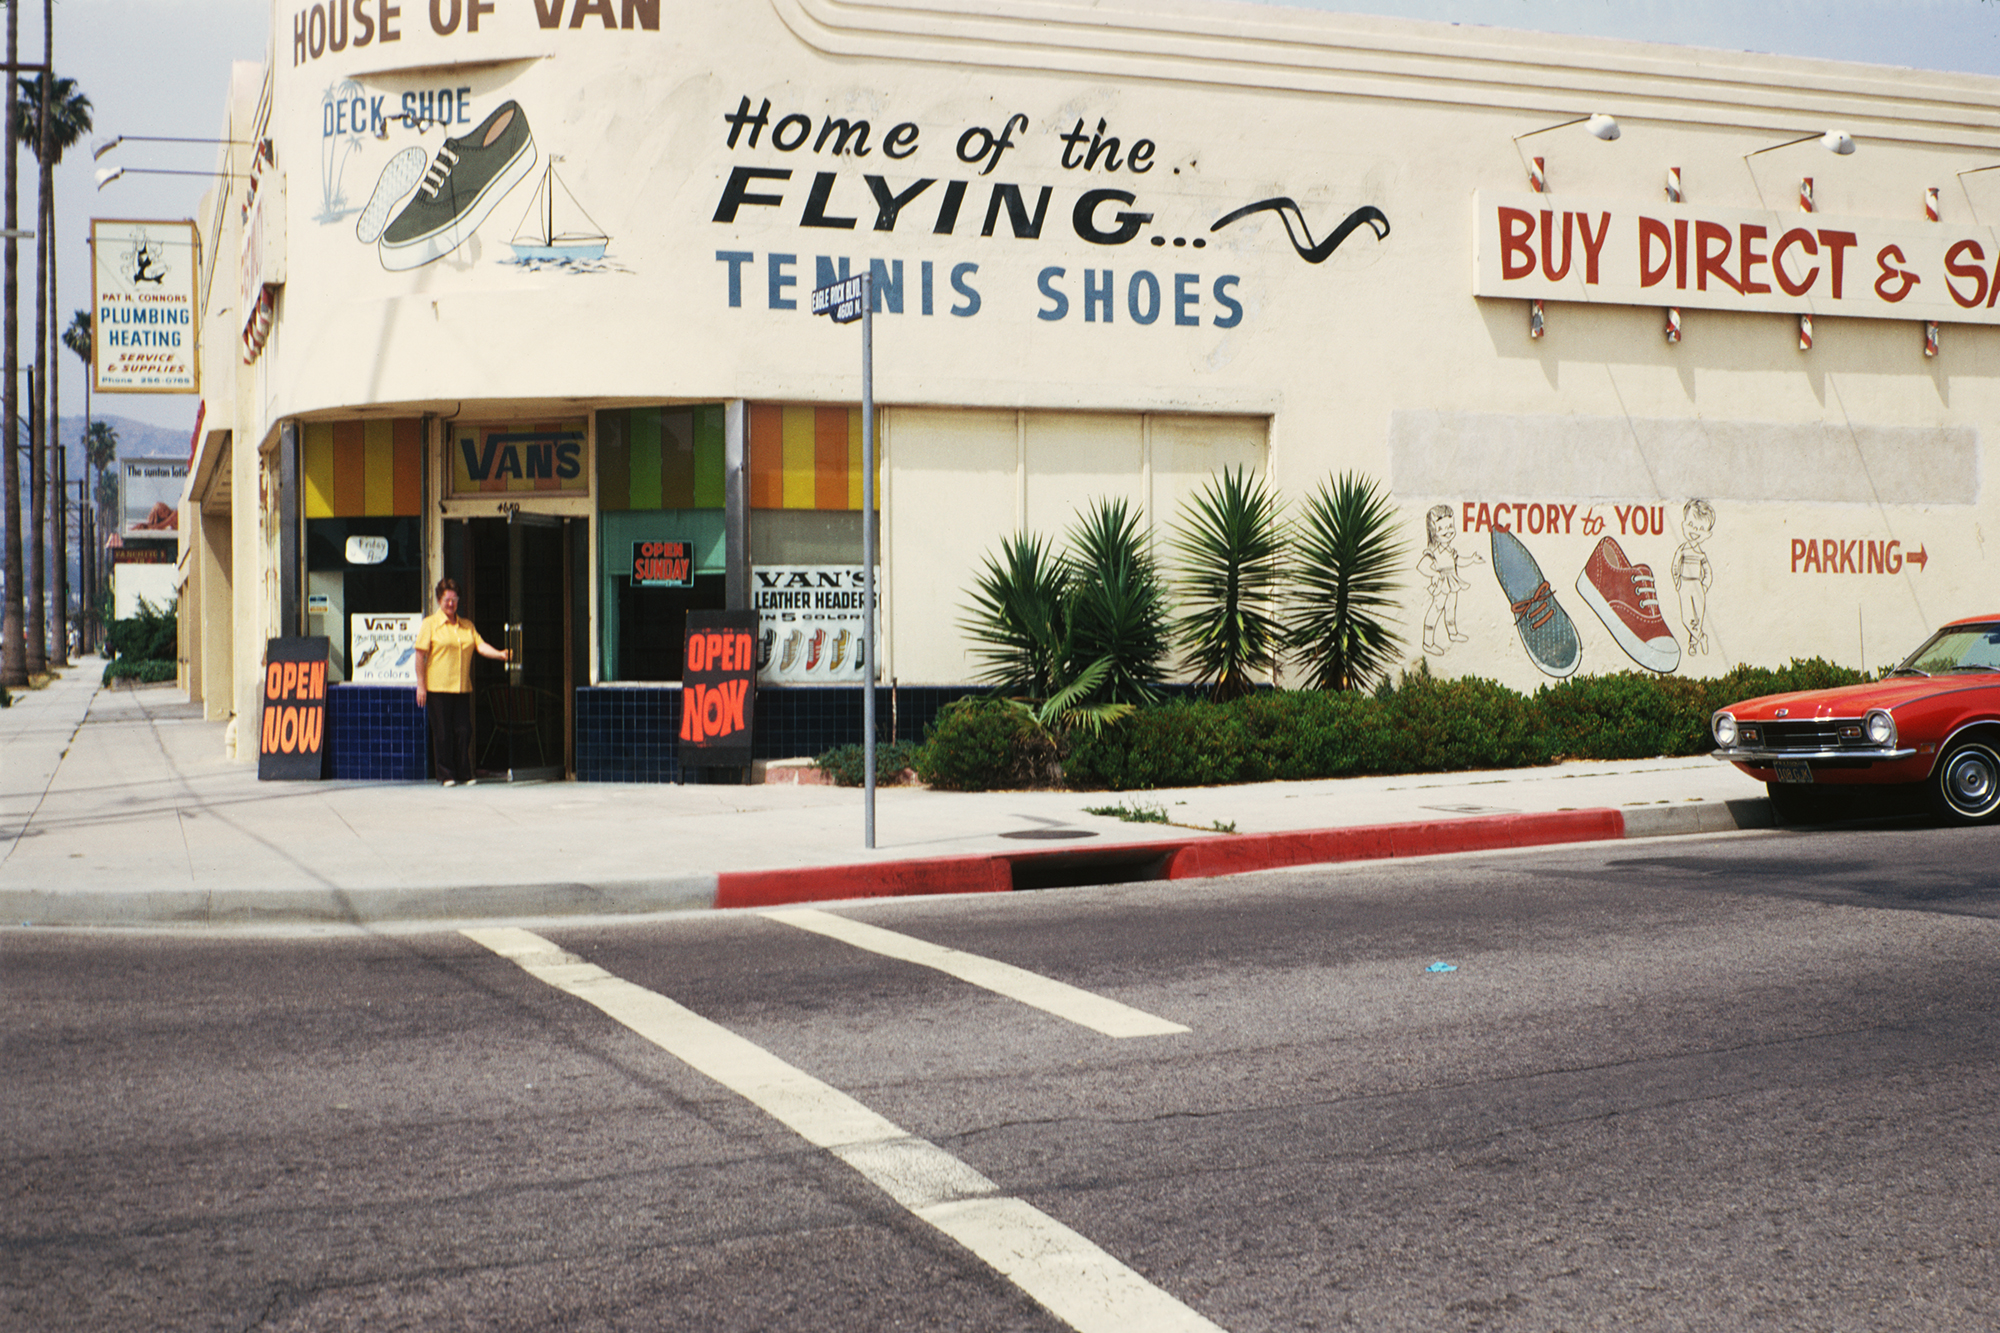 House of Vans was the first store away from the Anaheim, Calif. factory in Costa Mesa, Calif., in the early 1970s .